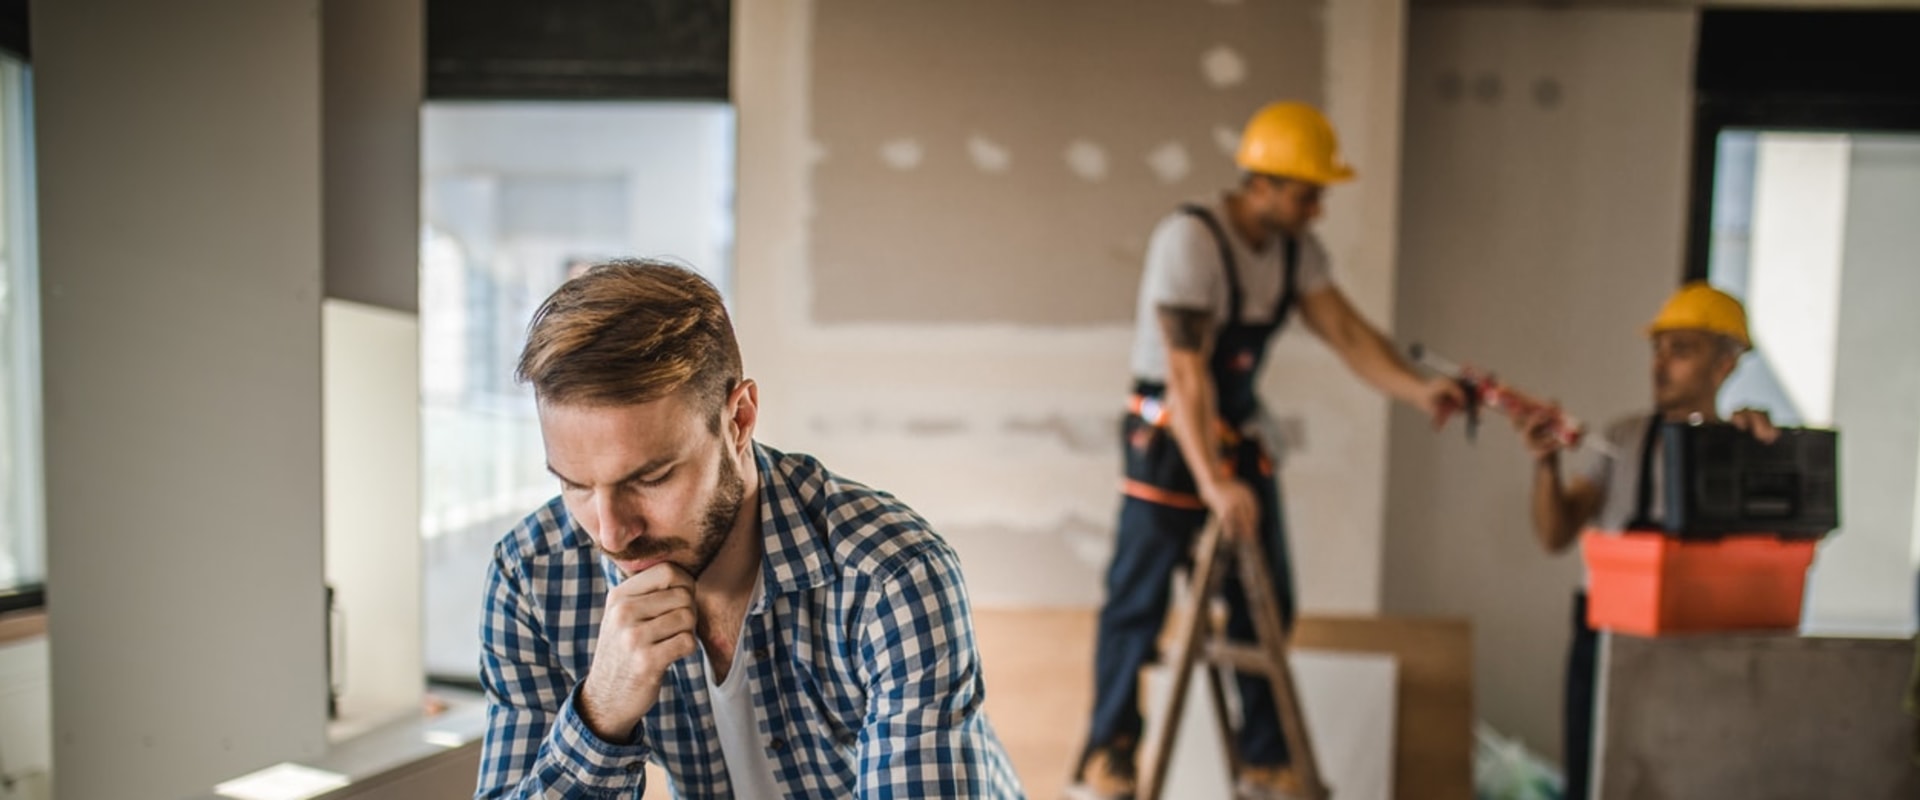 How to Start a Home Remodeling Business: A Step-by-Step Guide